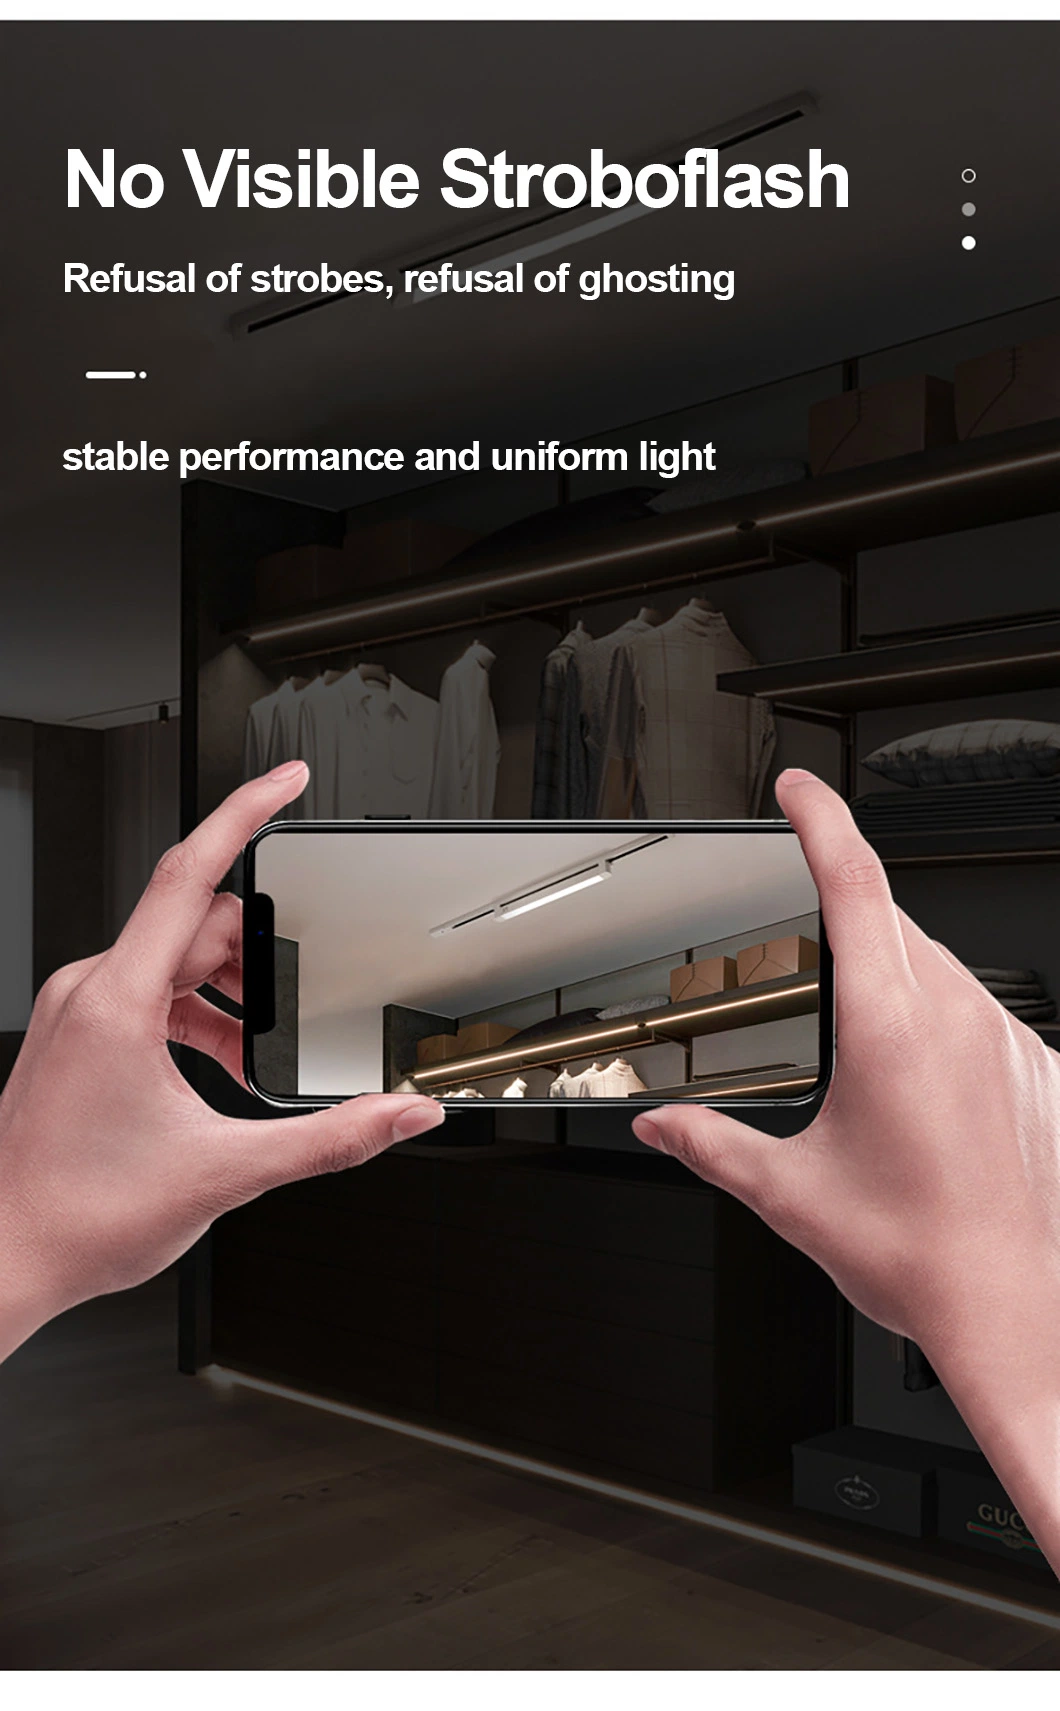 High Performance Indoor Dimming Rotatable Recessed Linear Light Track Lighting